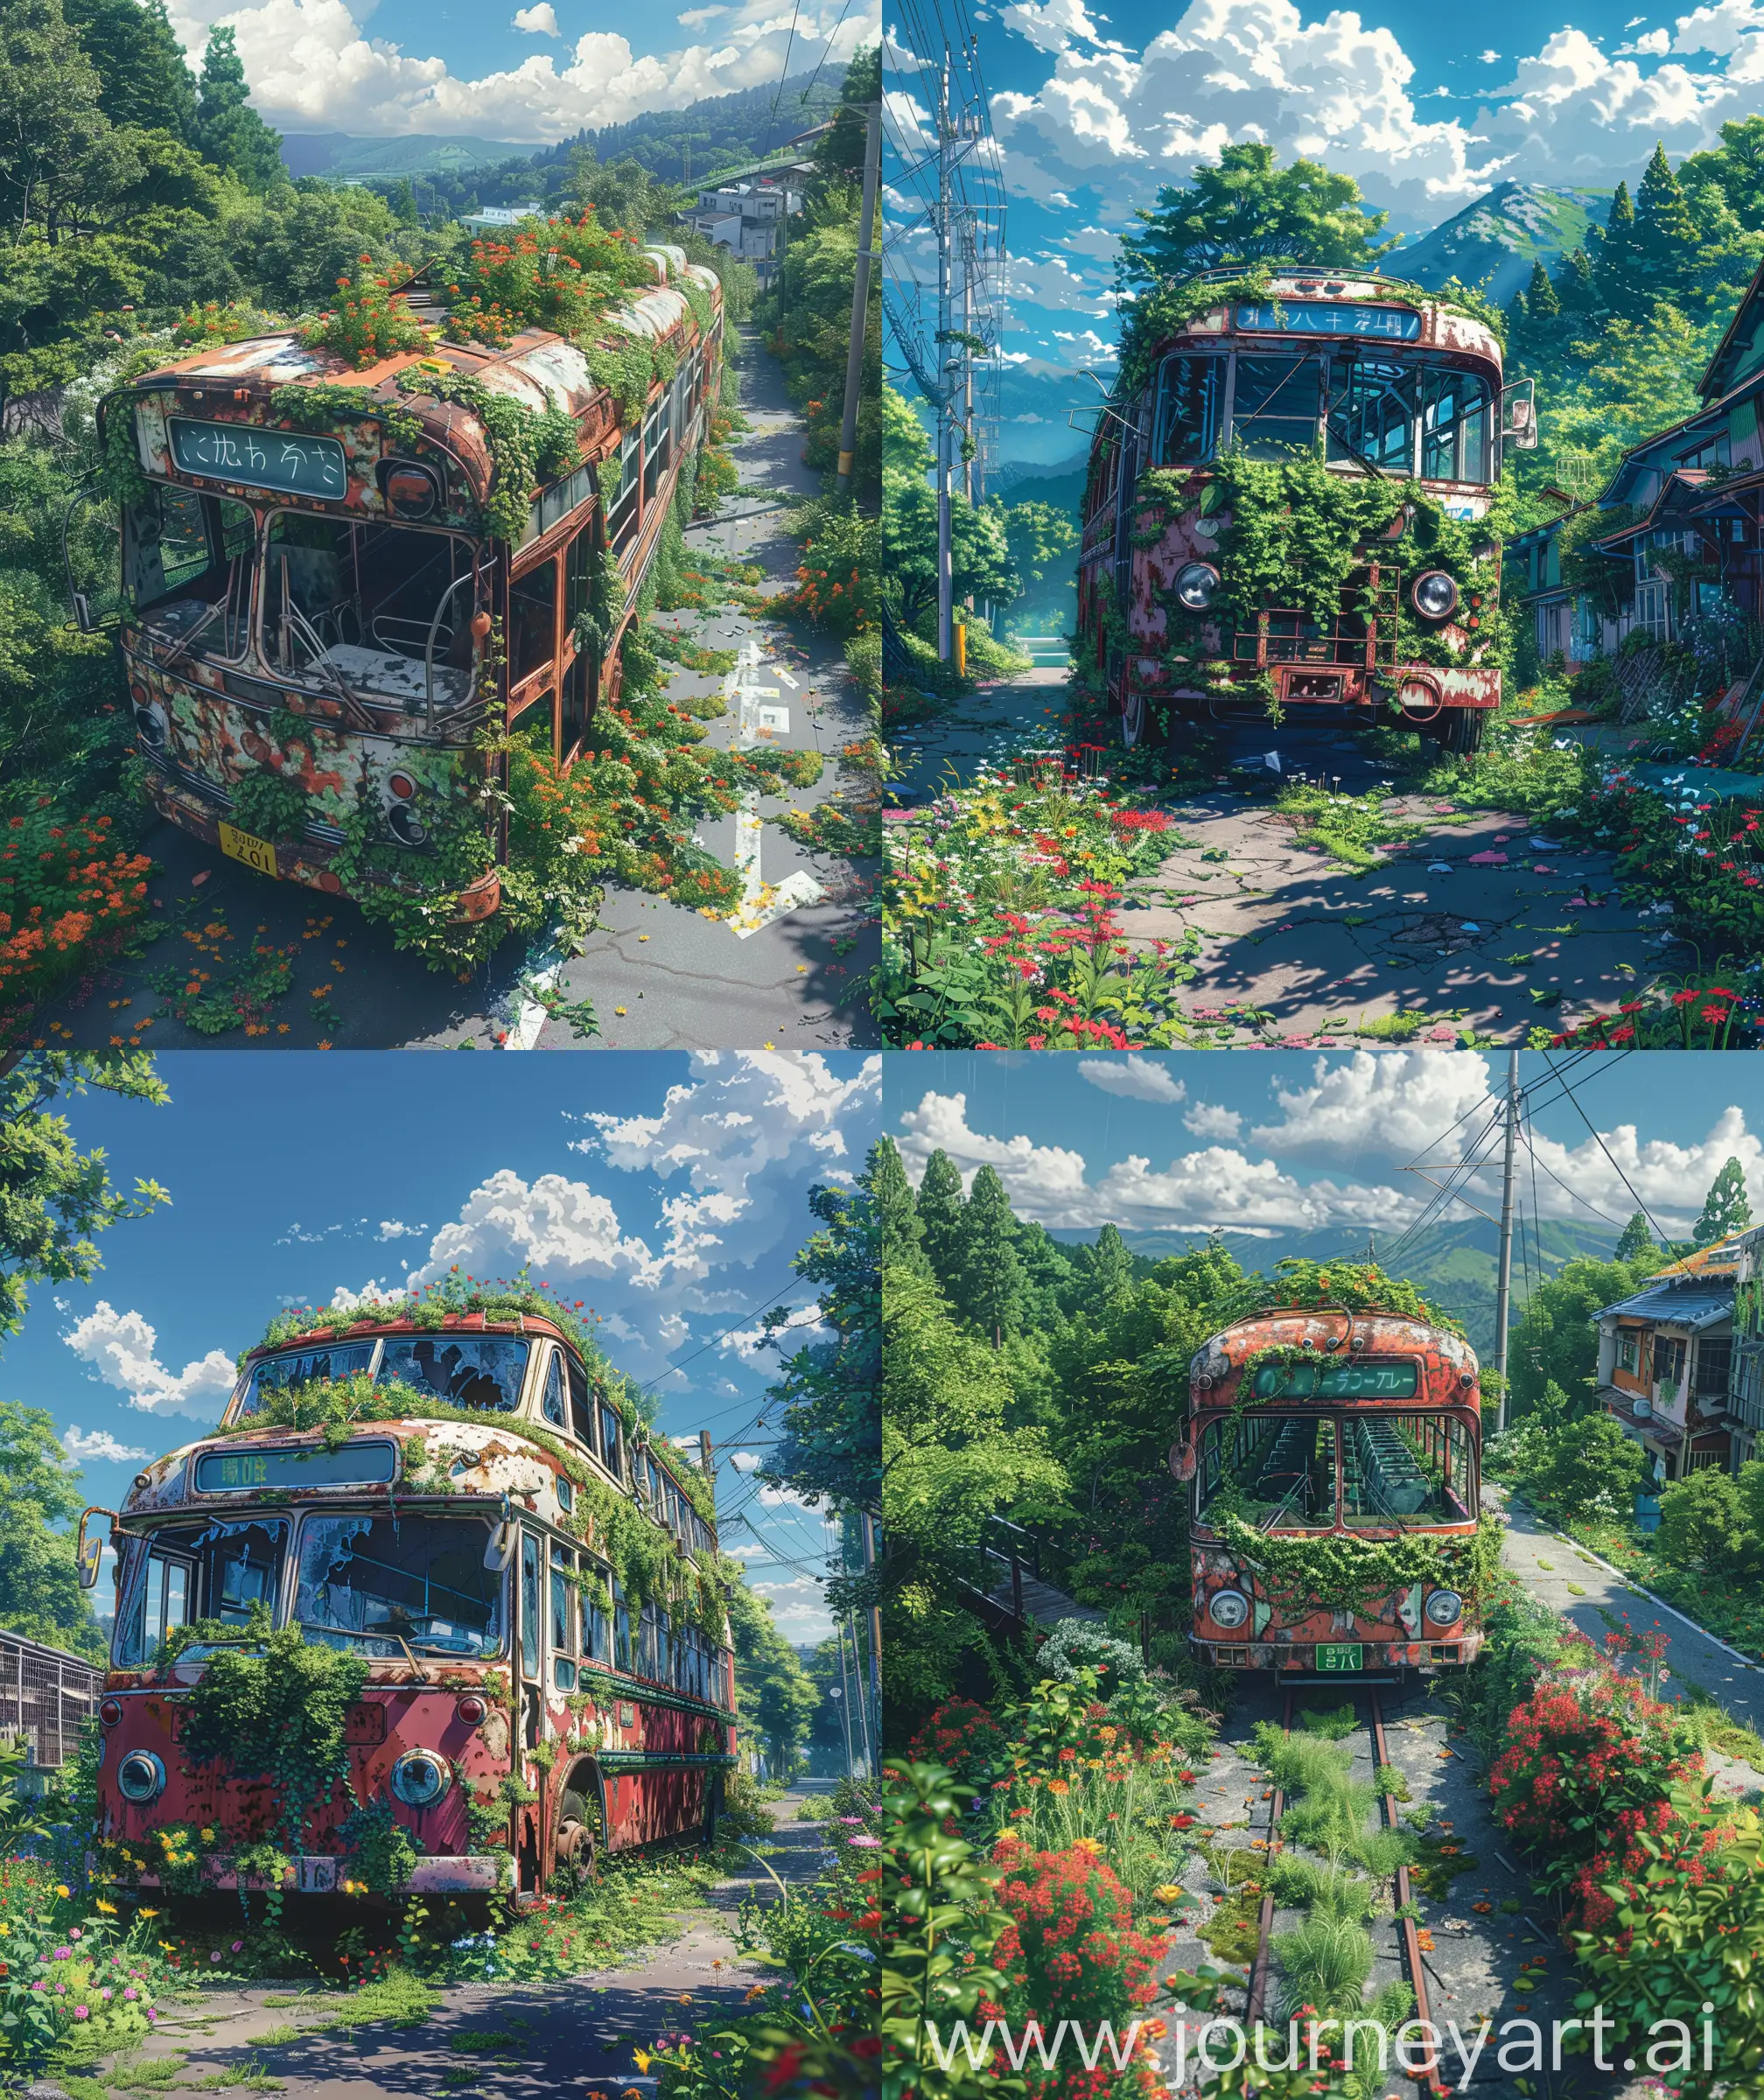 Anime scenary, illustration, mokoto shinkai, and Ghibli style mix, direct front facade view of abandoned bus top, overgrown ivy and wild colorful flowers, road, ultra HD, high quality, sharp details, no hyperrealistic --ar 27:32 --s 400